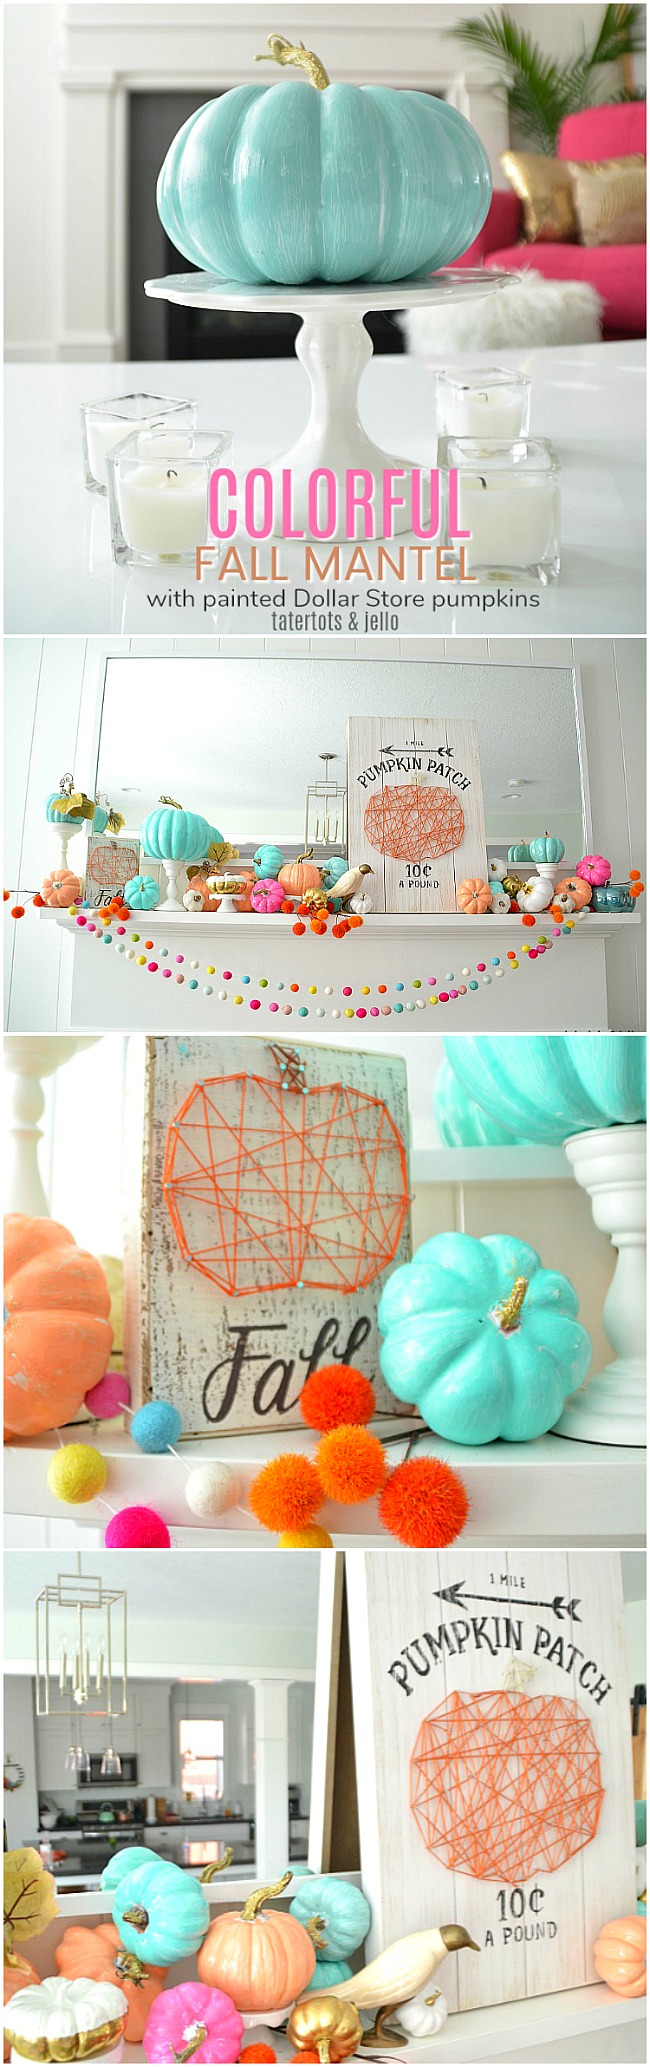 Paint inexpensive dollar tree pumpkins a bright color for a happy fall mantel!